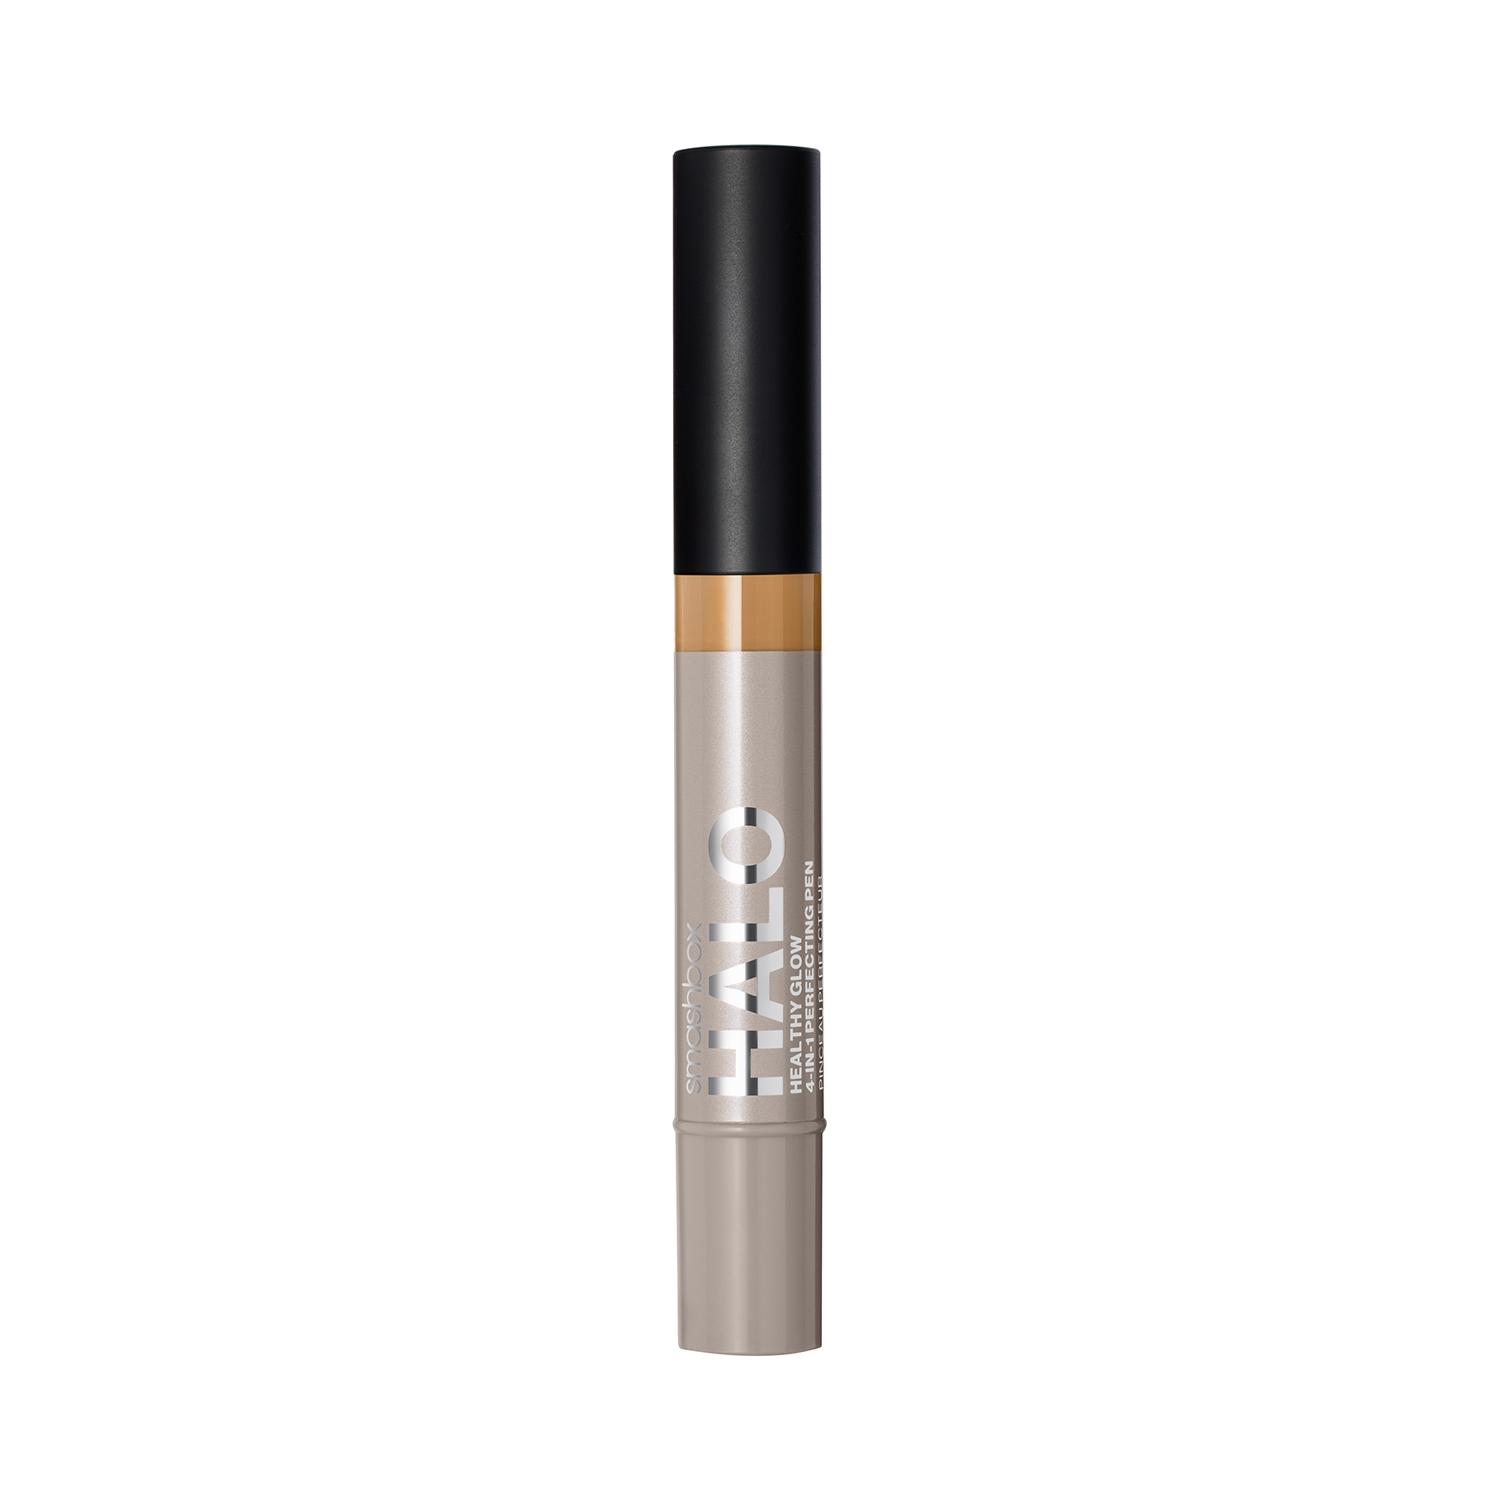 smashbox halo healthy glow 4-in-1 perfecting concealer pen - m10w (3.5ml)